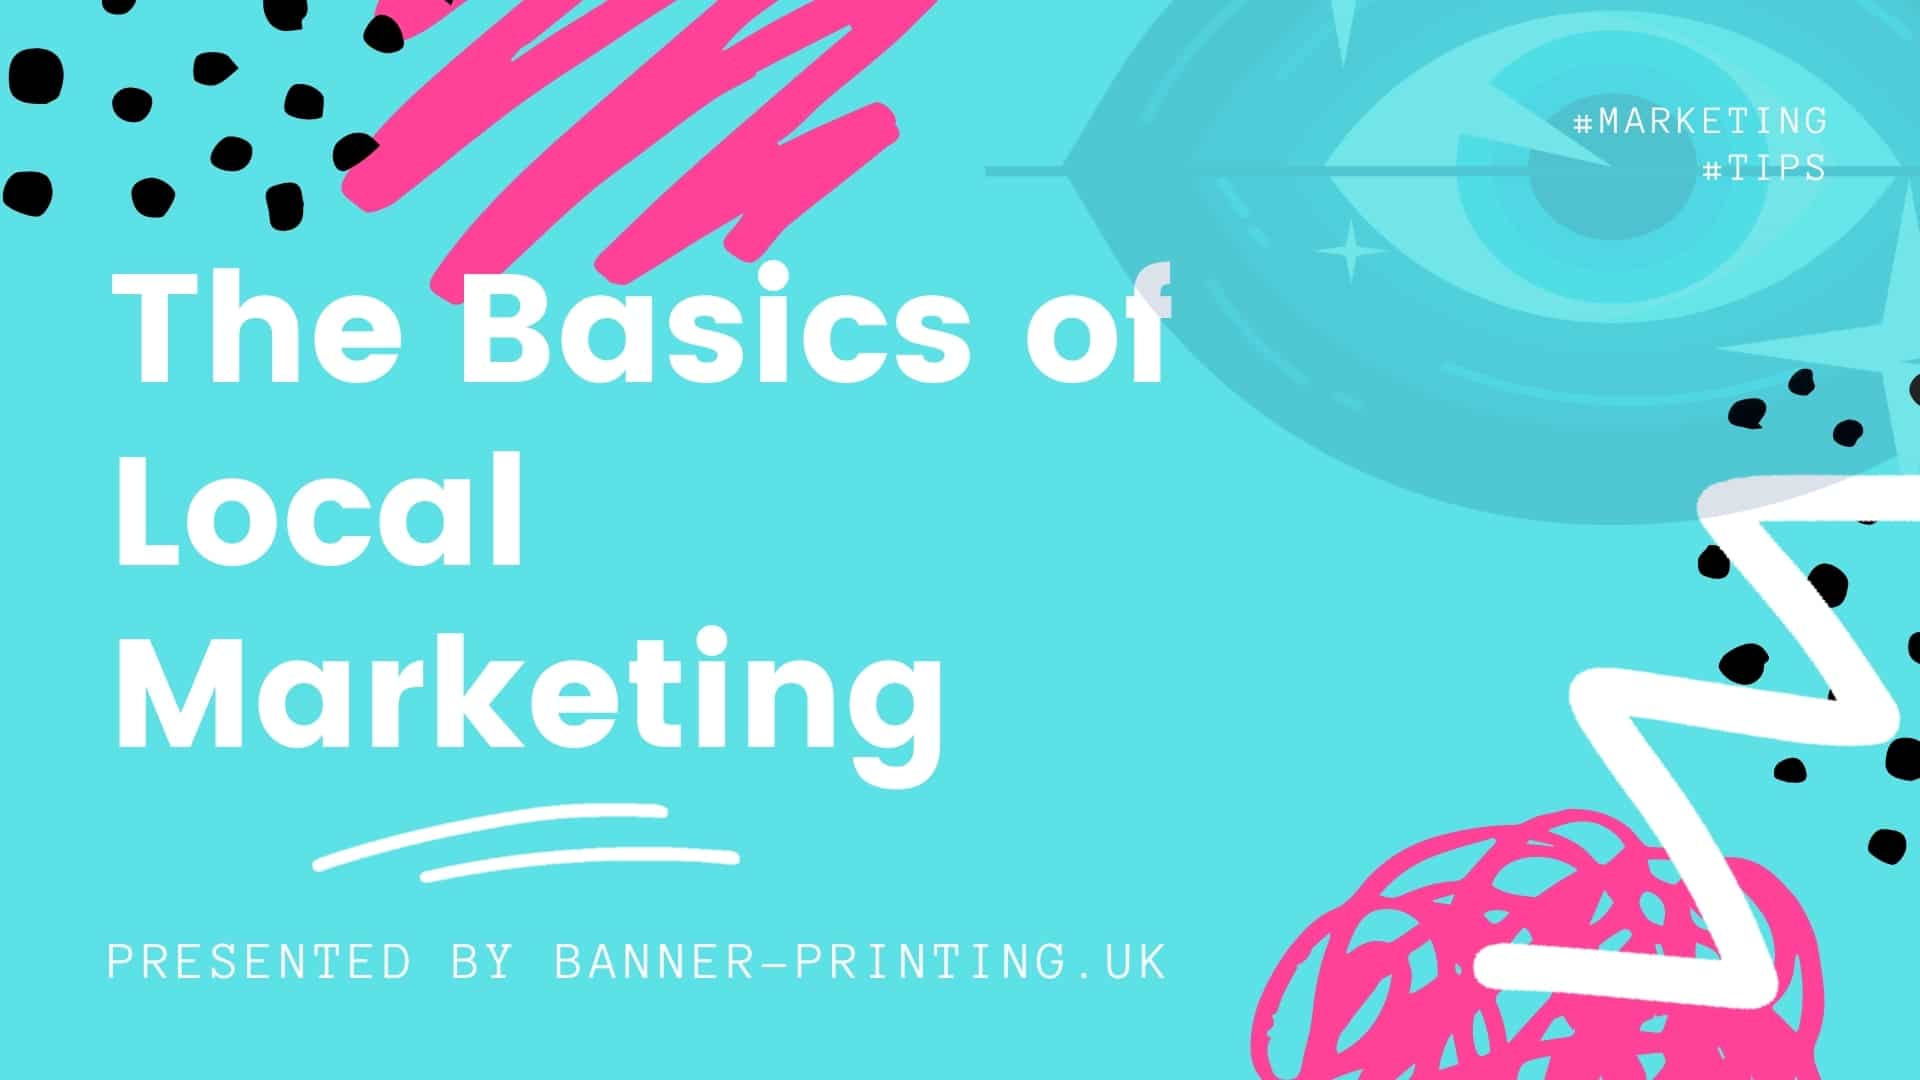 The Basics of Local Marketing - banners priting uk